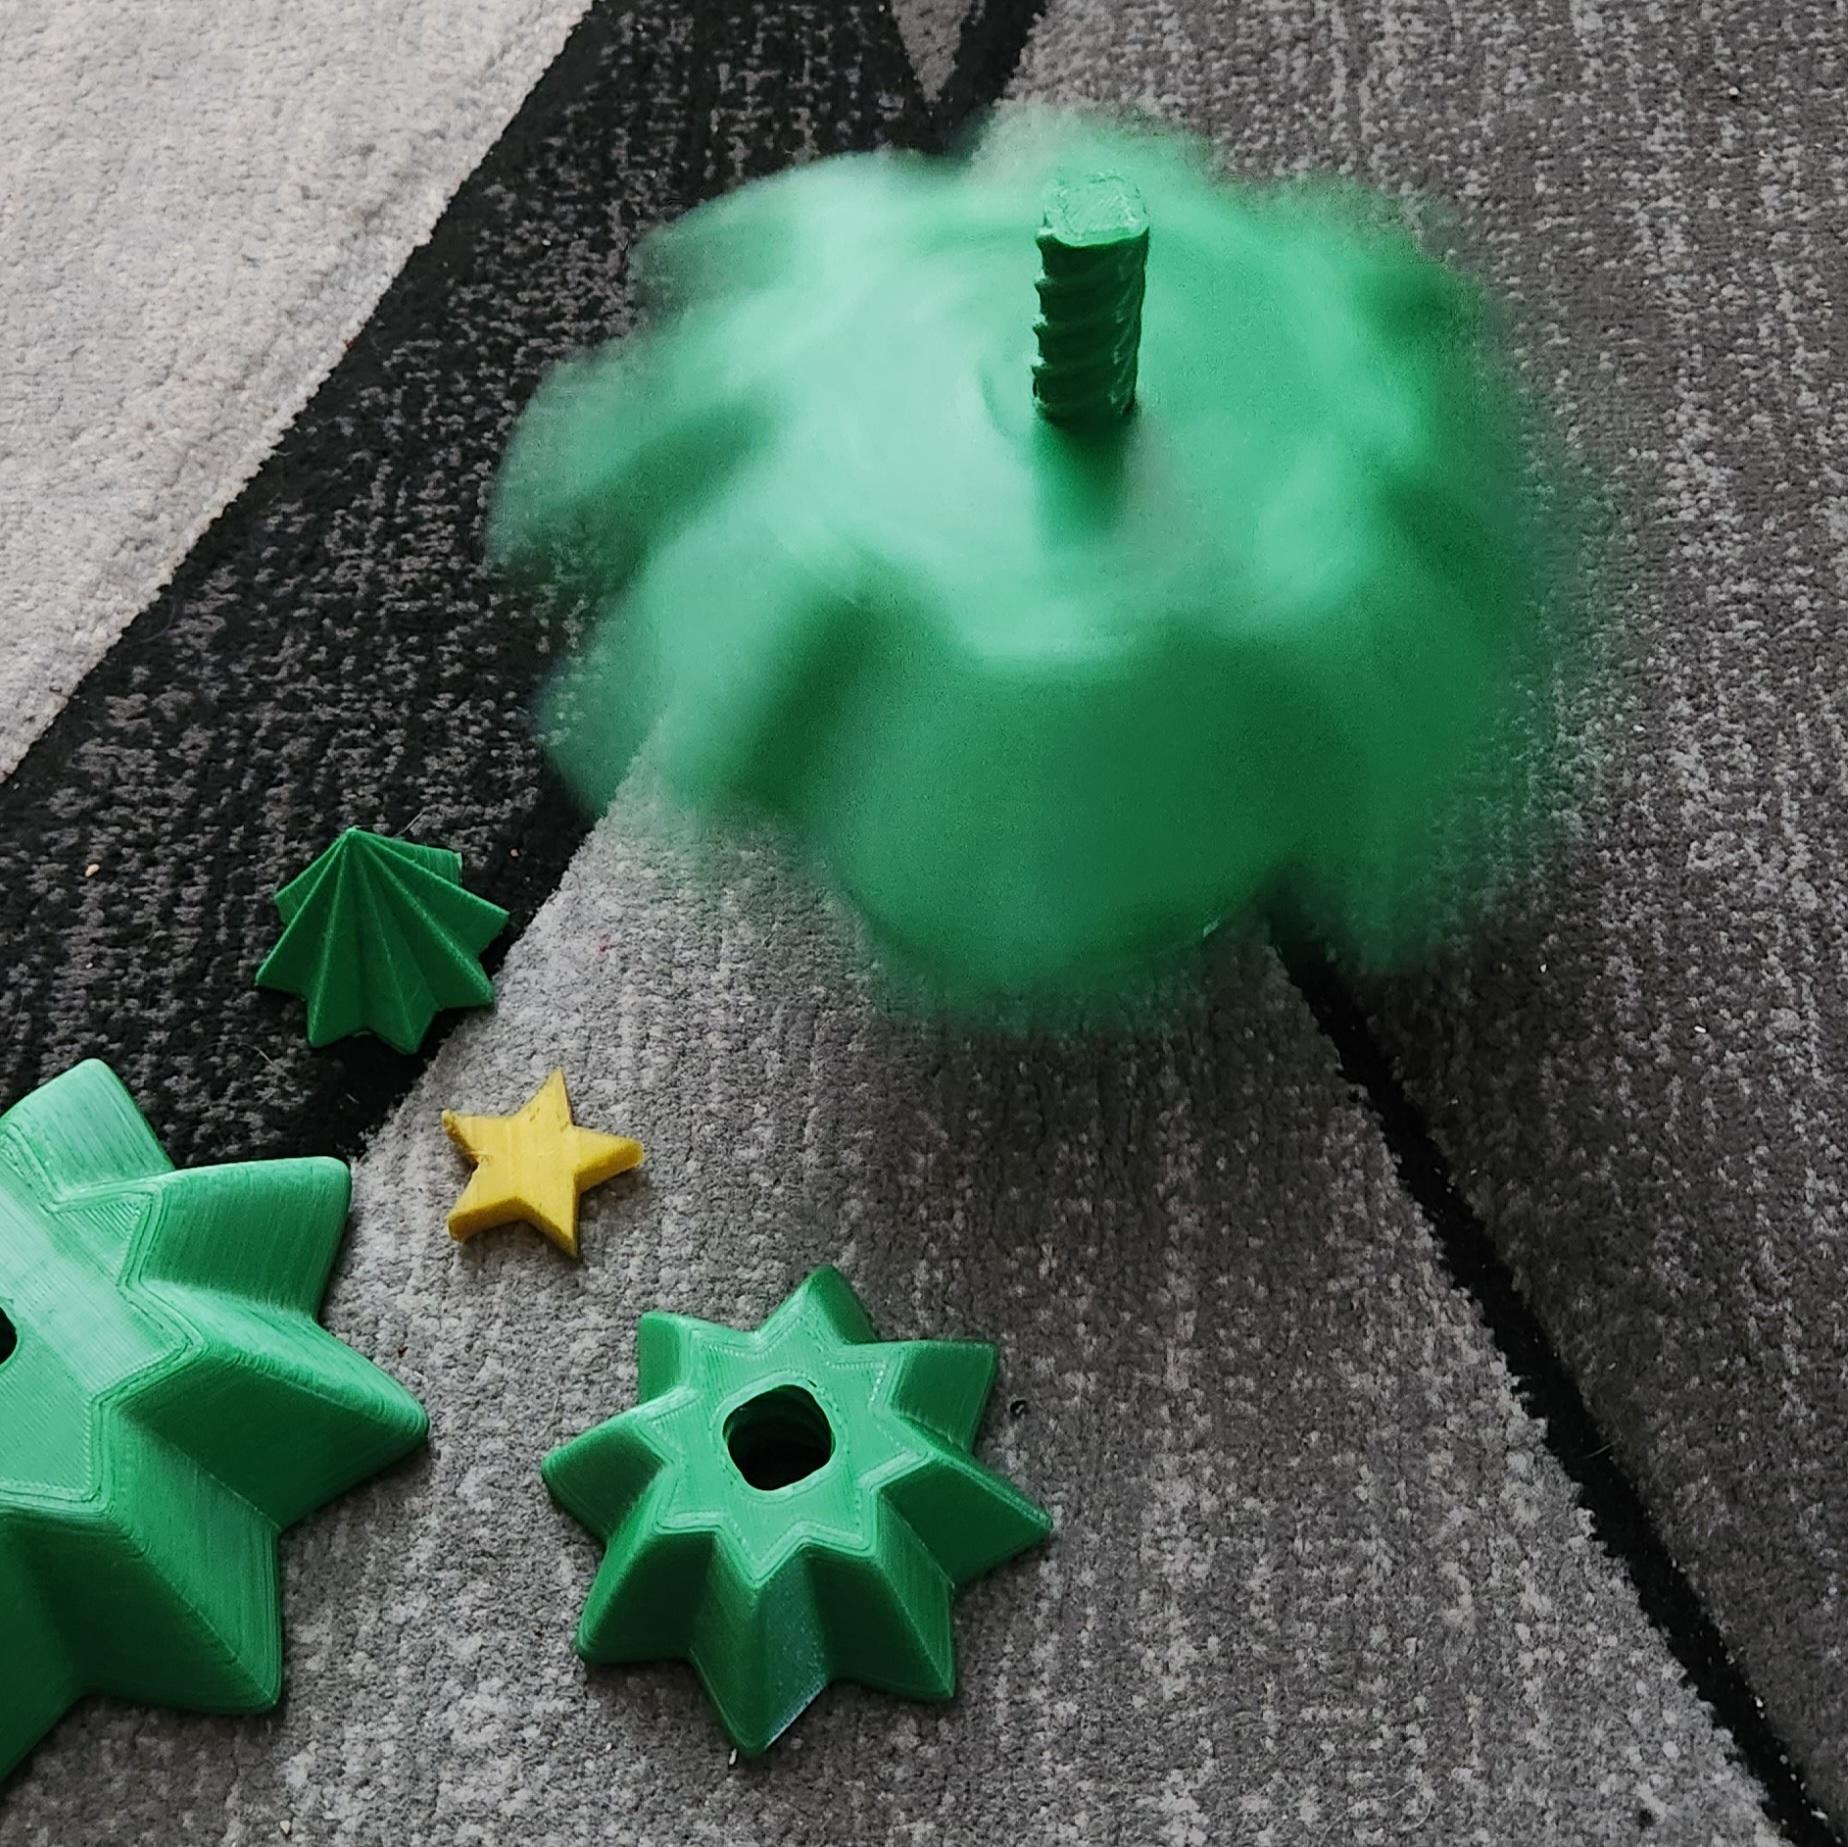 SPINNING STACKABLE CHRISTMAS TREE FIDGET TOY 3d model